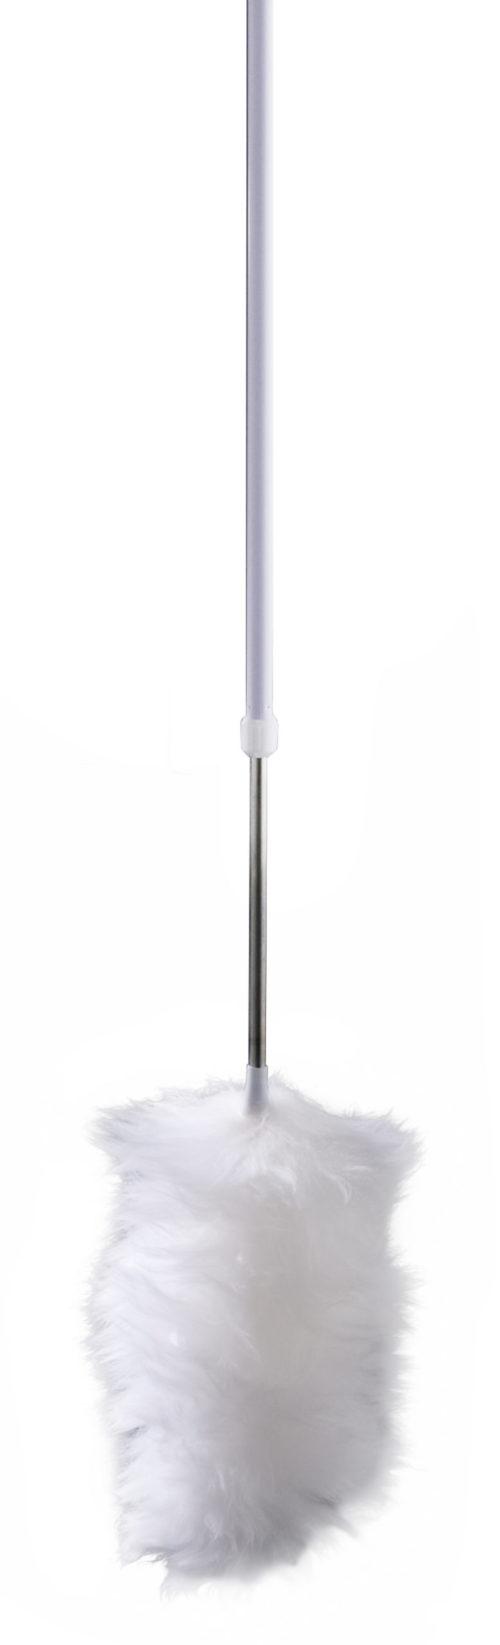 Wool Duster - 1.8m Extension Handle